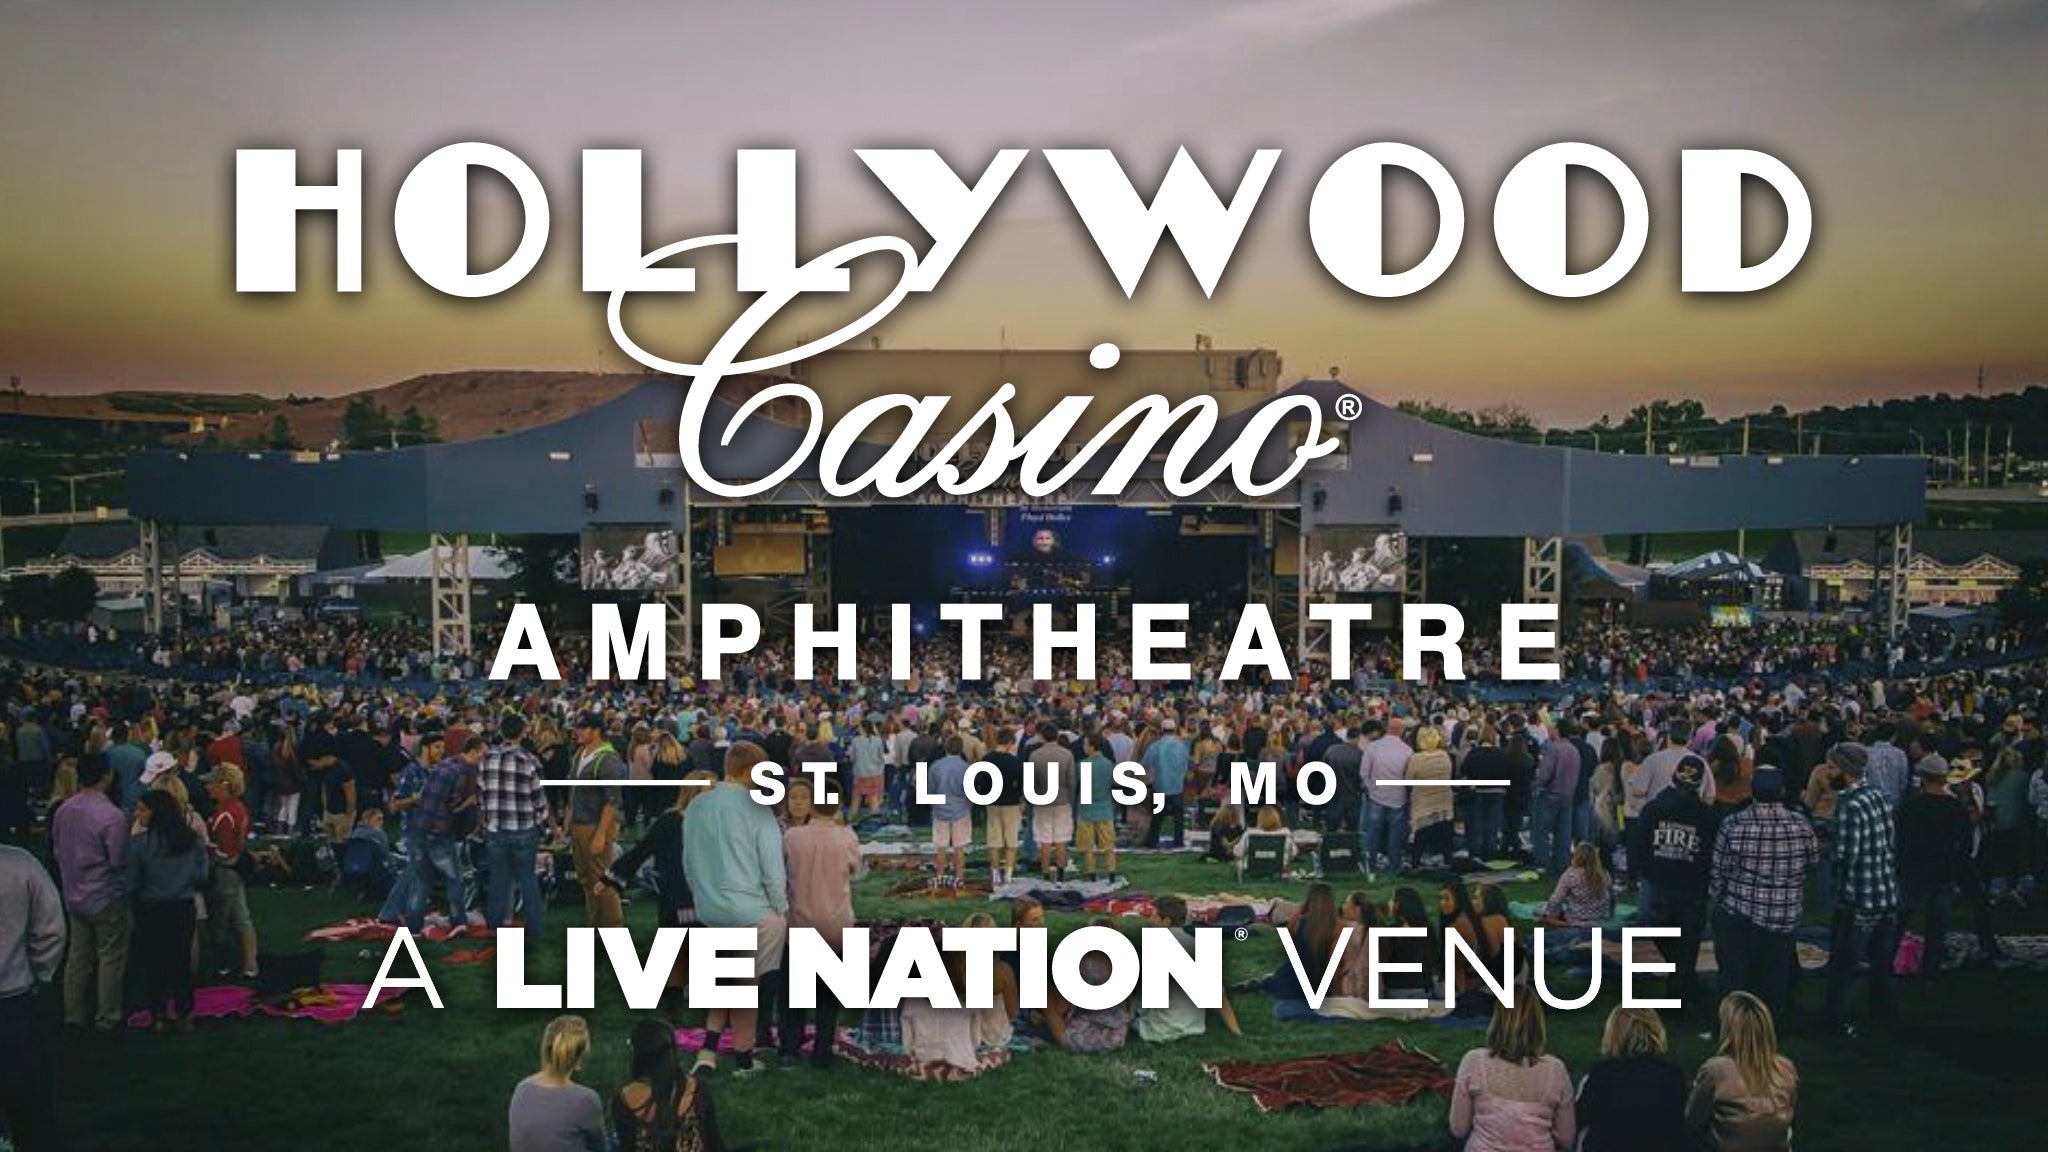 Hollywood Casino Amphitheatre St. Louis, MO 2020 show schedule